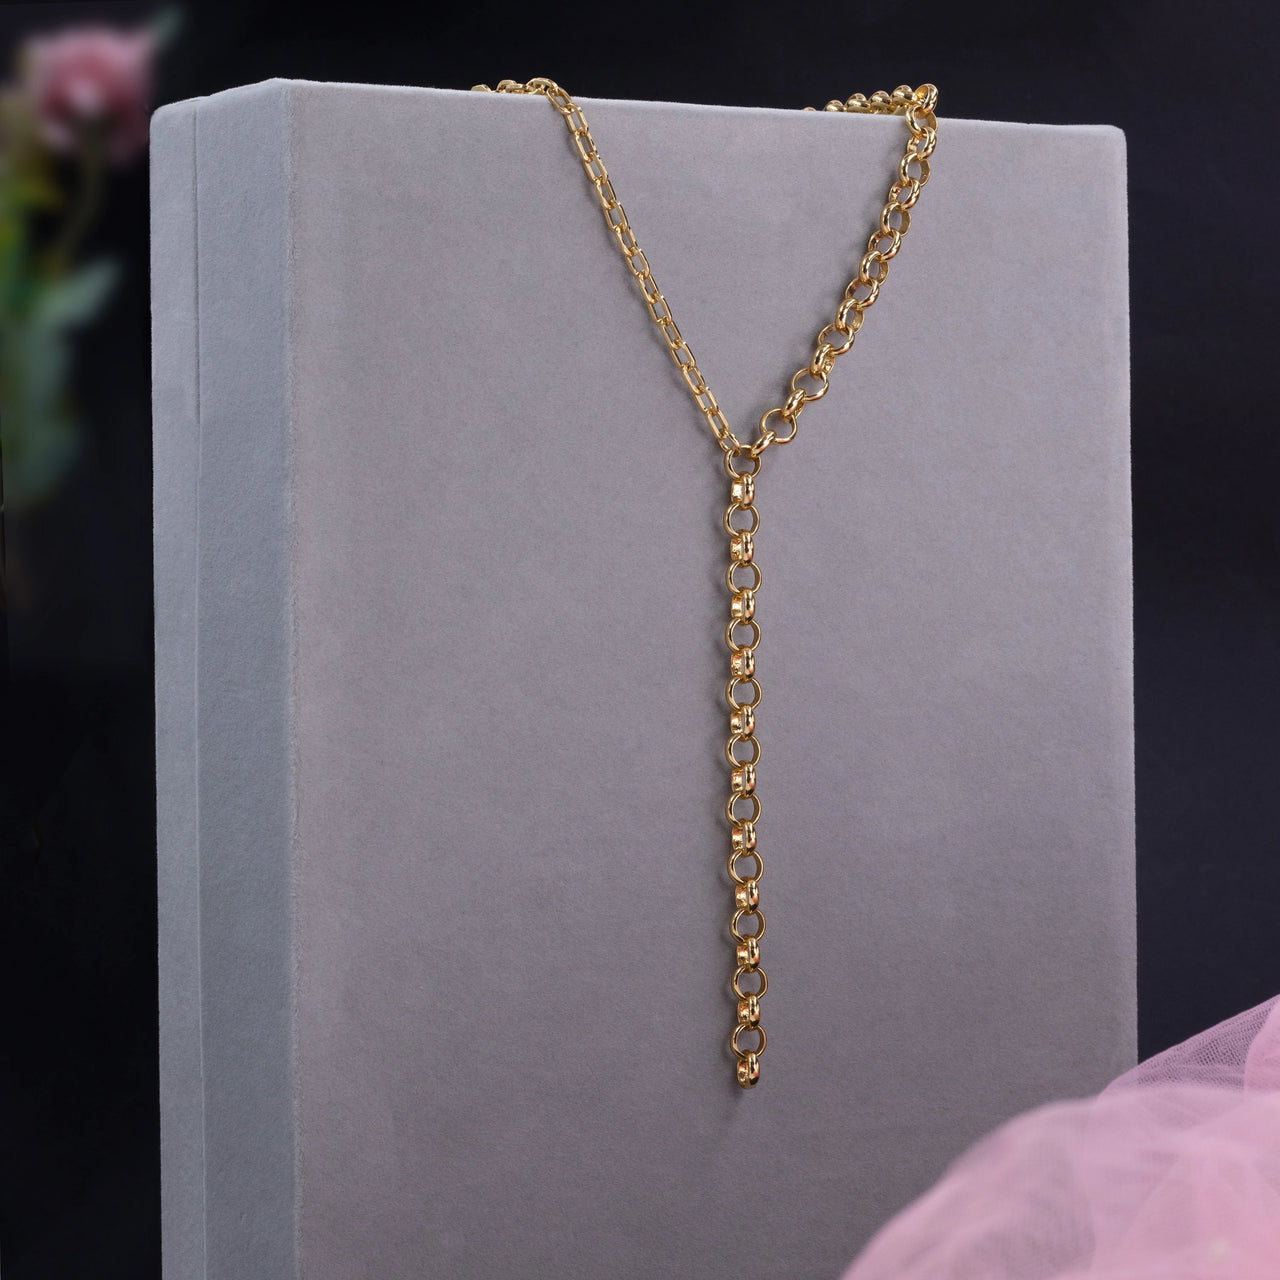 Ivy Dual Gold Chain Necklace